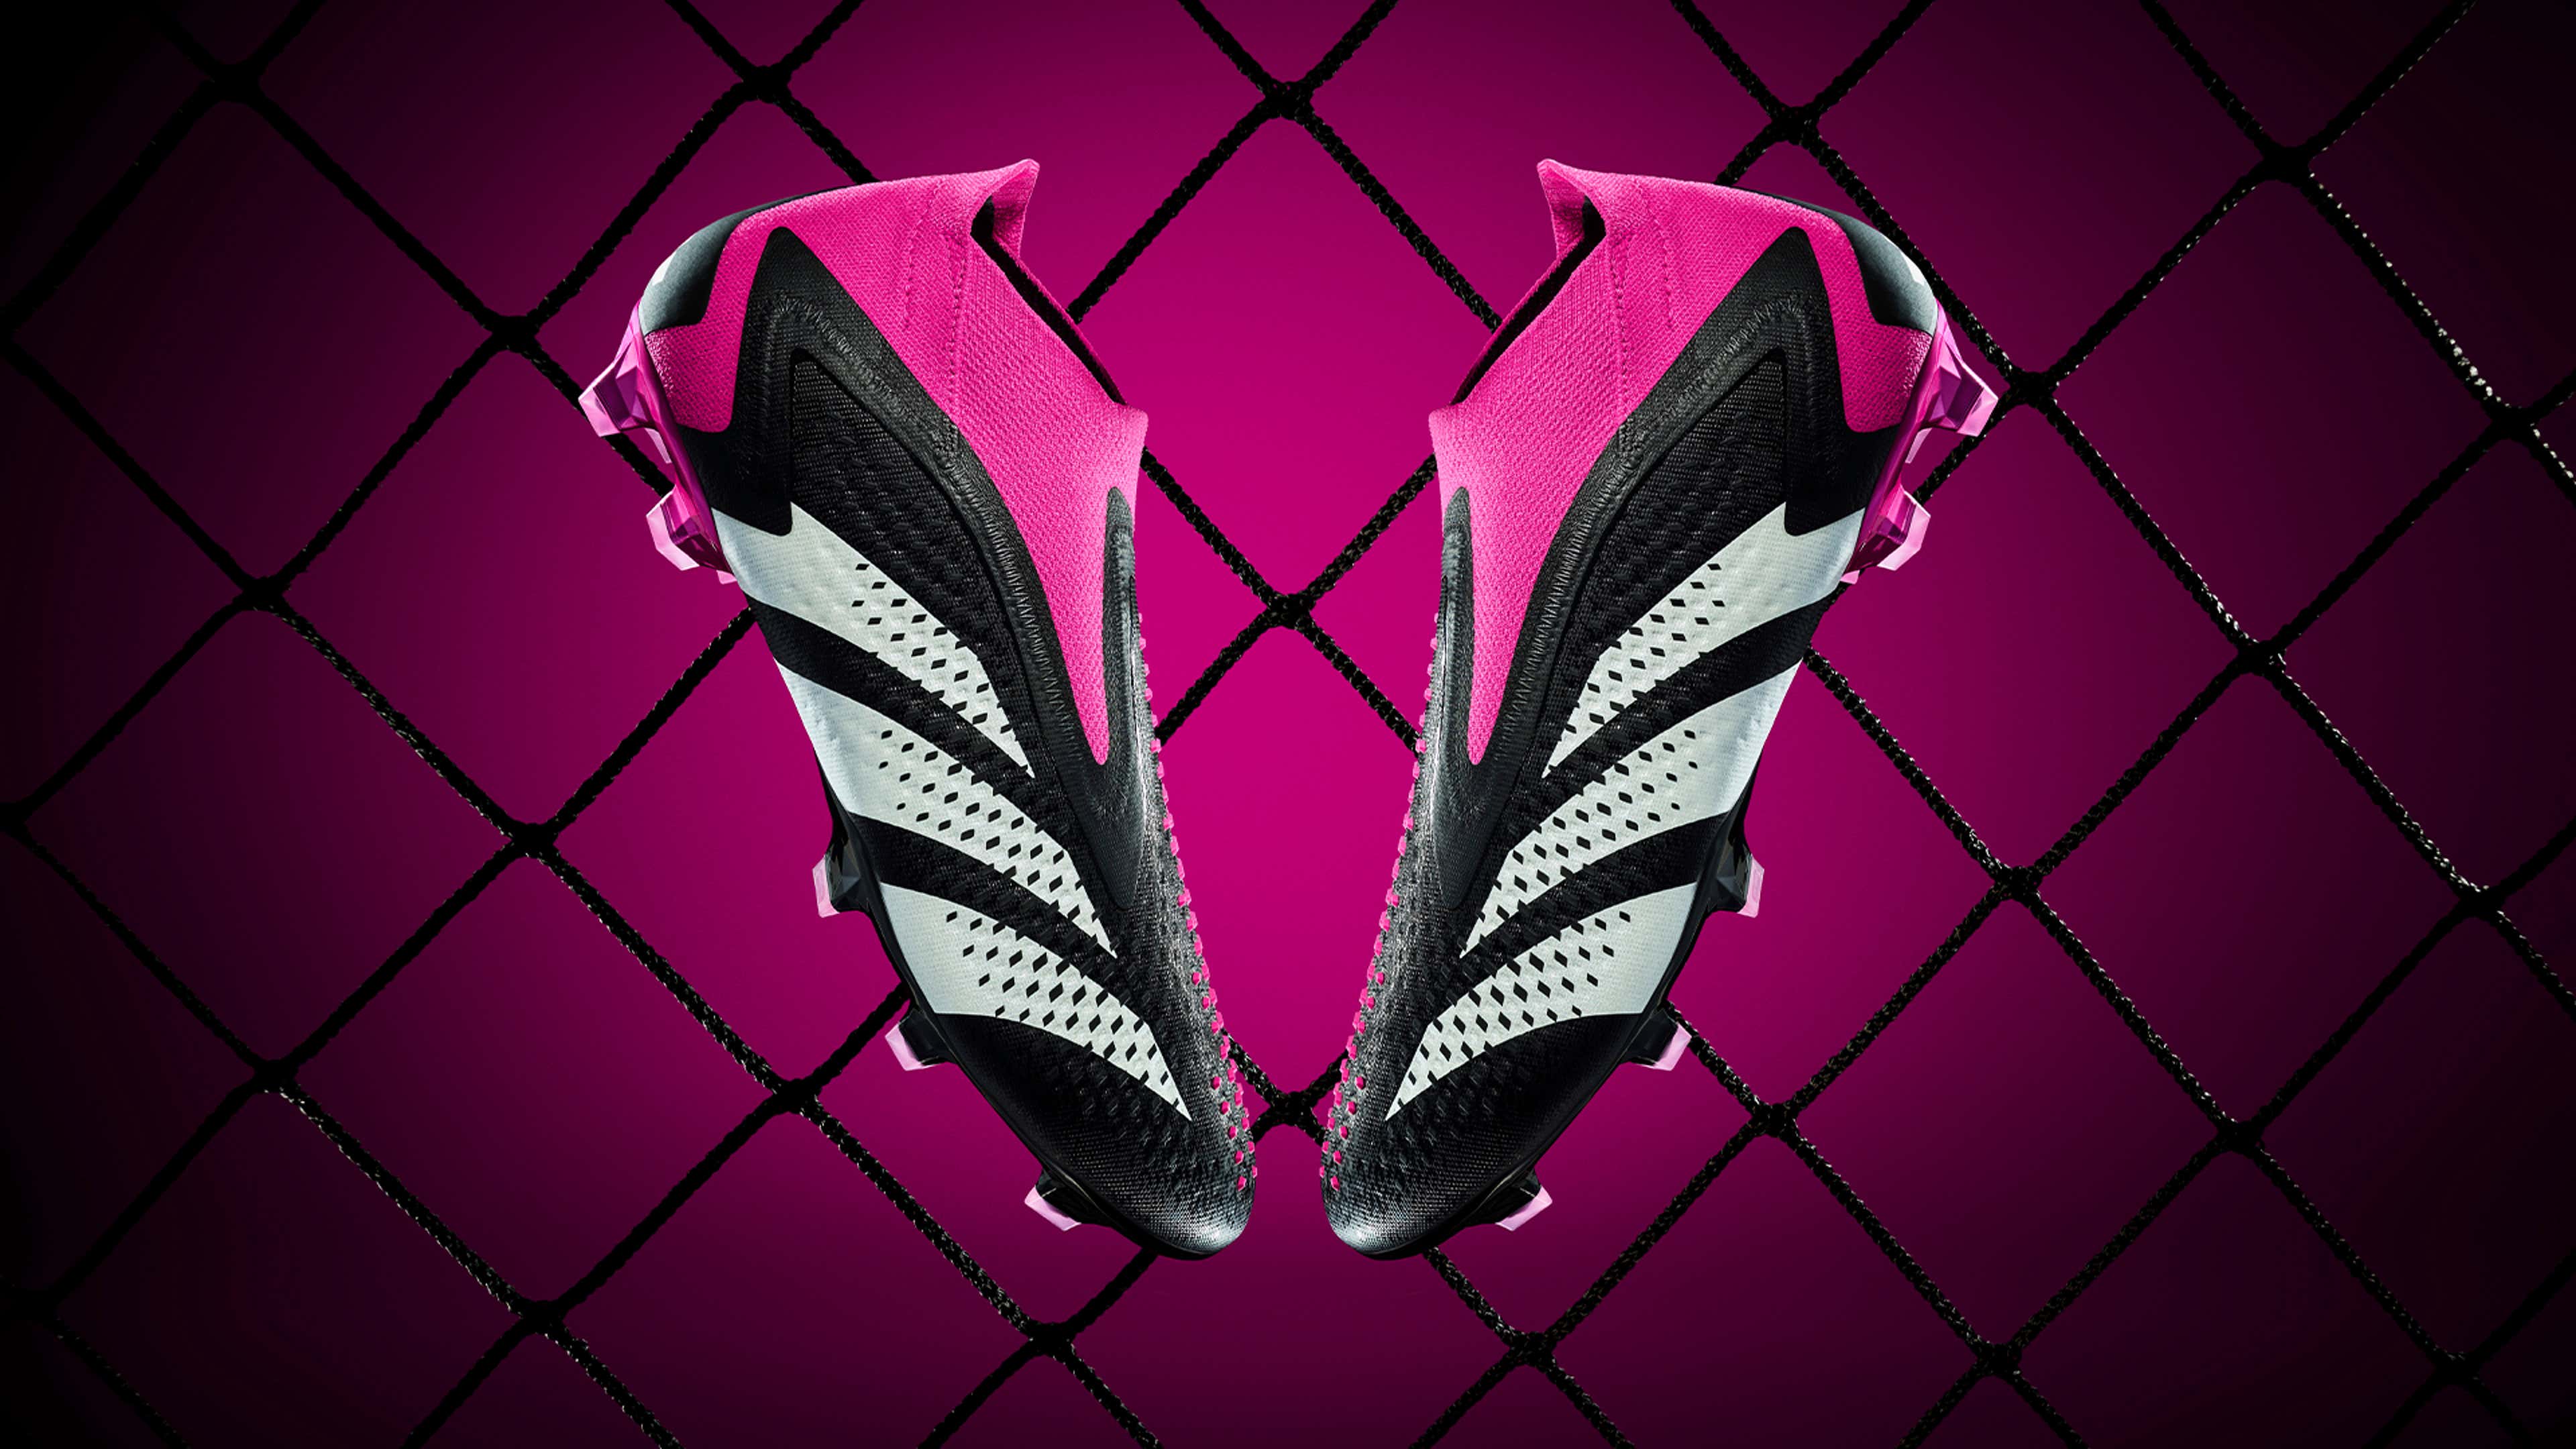 adidas goes for accuracy with its Predator | Goal.com